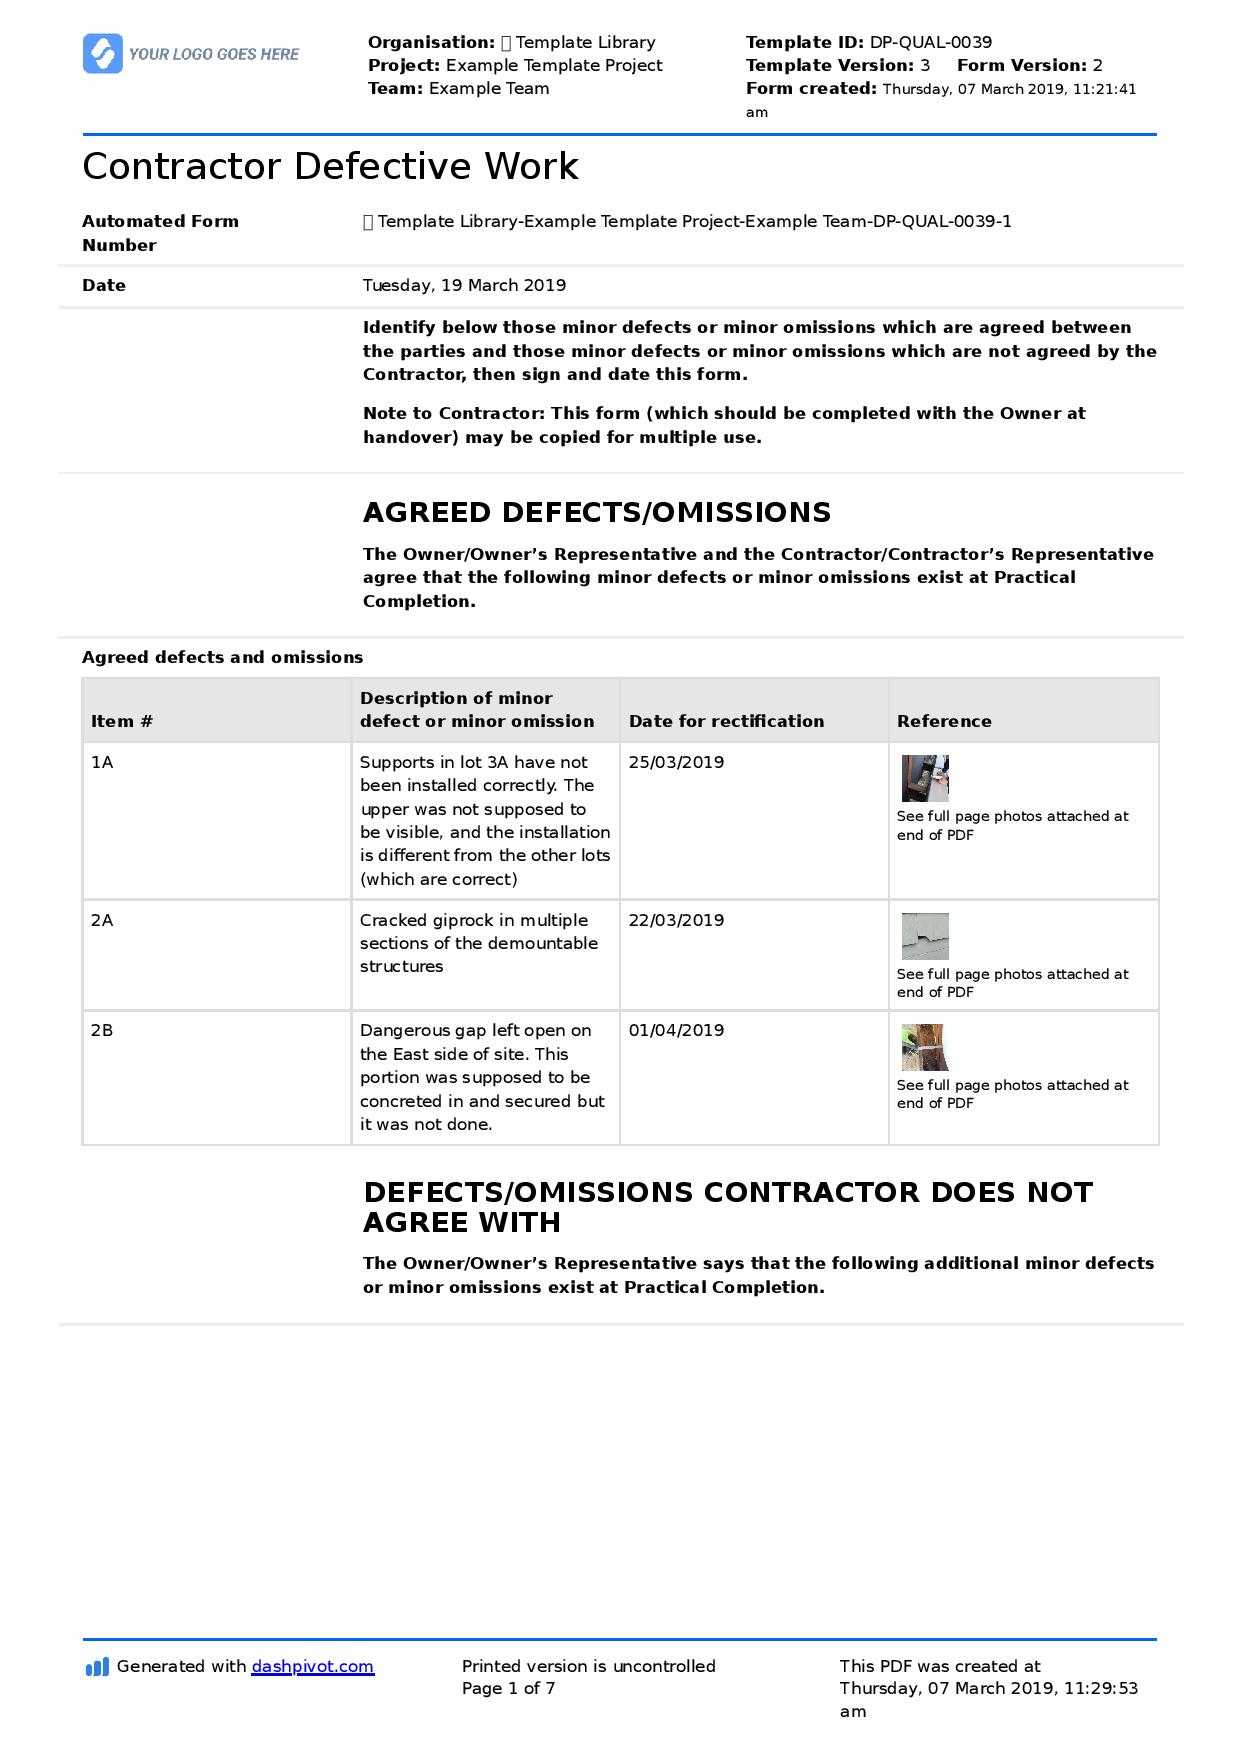 Letter To Contractor For Defective Work: Sample Letter And With Regard To Construction Deficiency Report Template